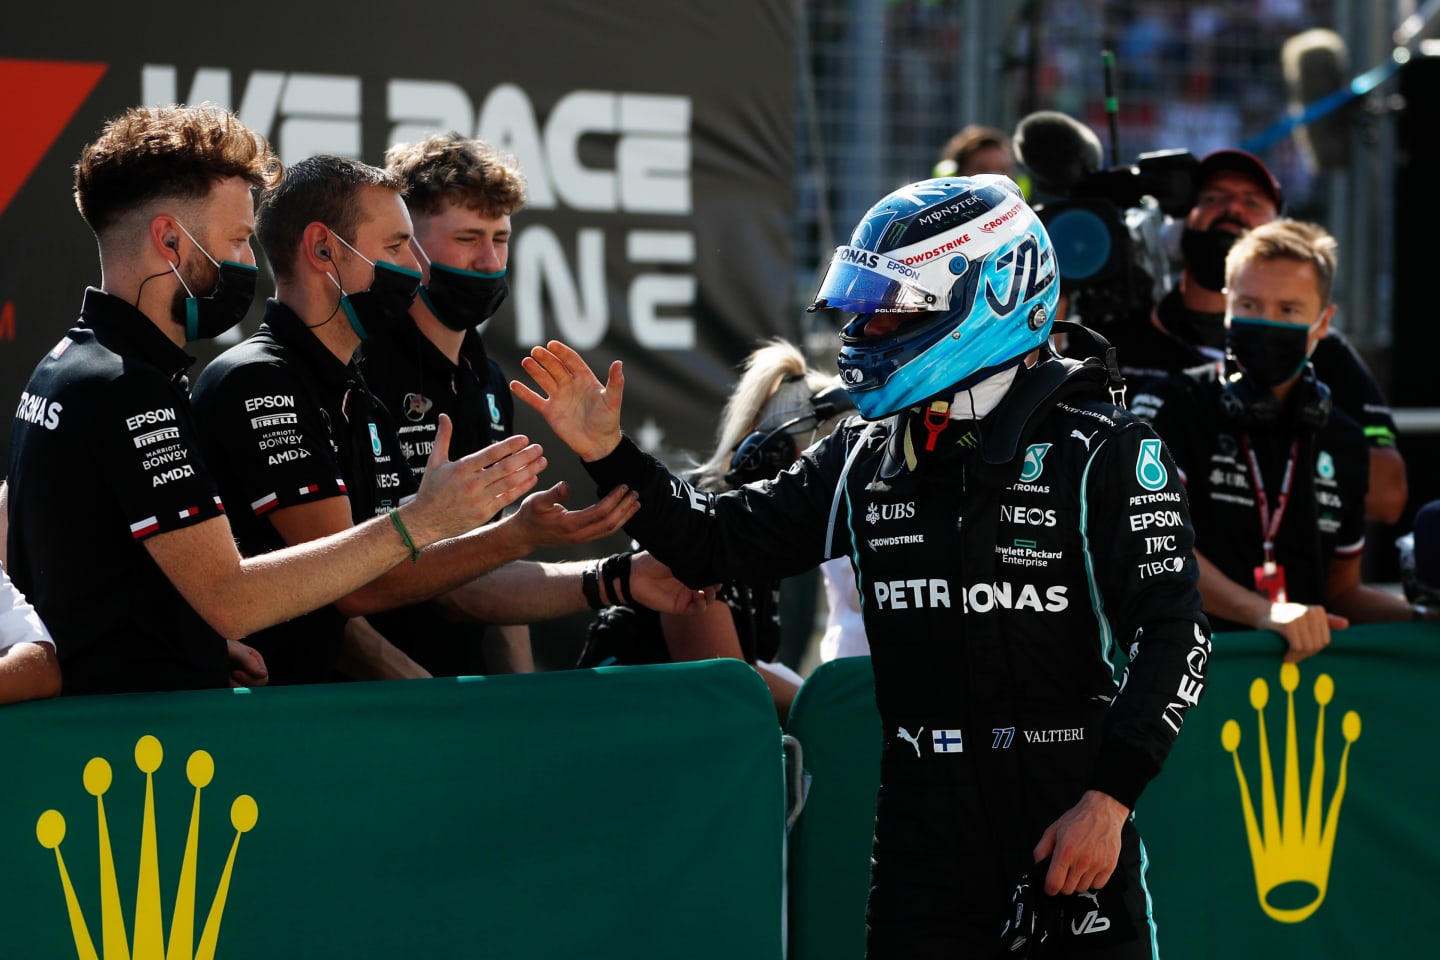 BUDAPEST, HUNGARY - JULY 31: Second place qualifier Valtteri Bottas of Finland and Mercedes GP celebrates in parc ferme during qualifying ahead of the F1 Grand Prix of Hungary at Hungaroring on July 31, 2021 in Budapest, Hungary. (Photo by David W Cerny - Pool/Getty Images)